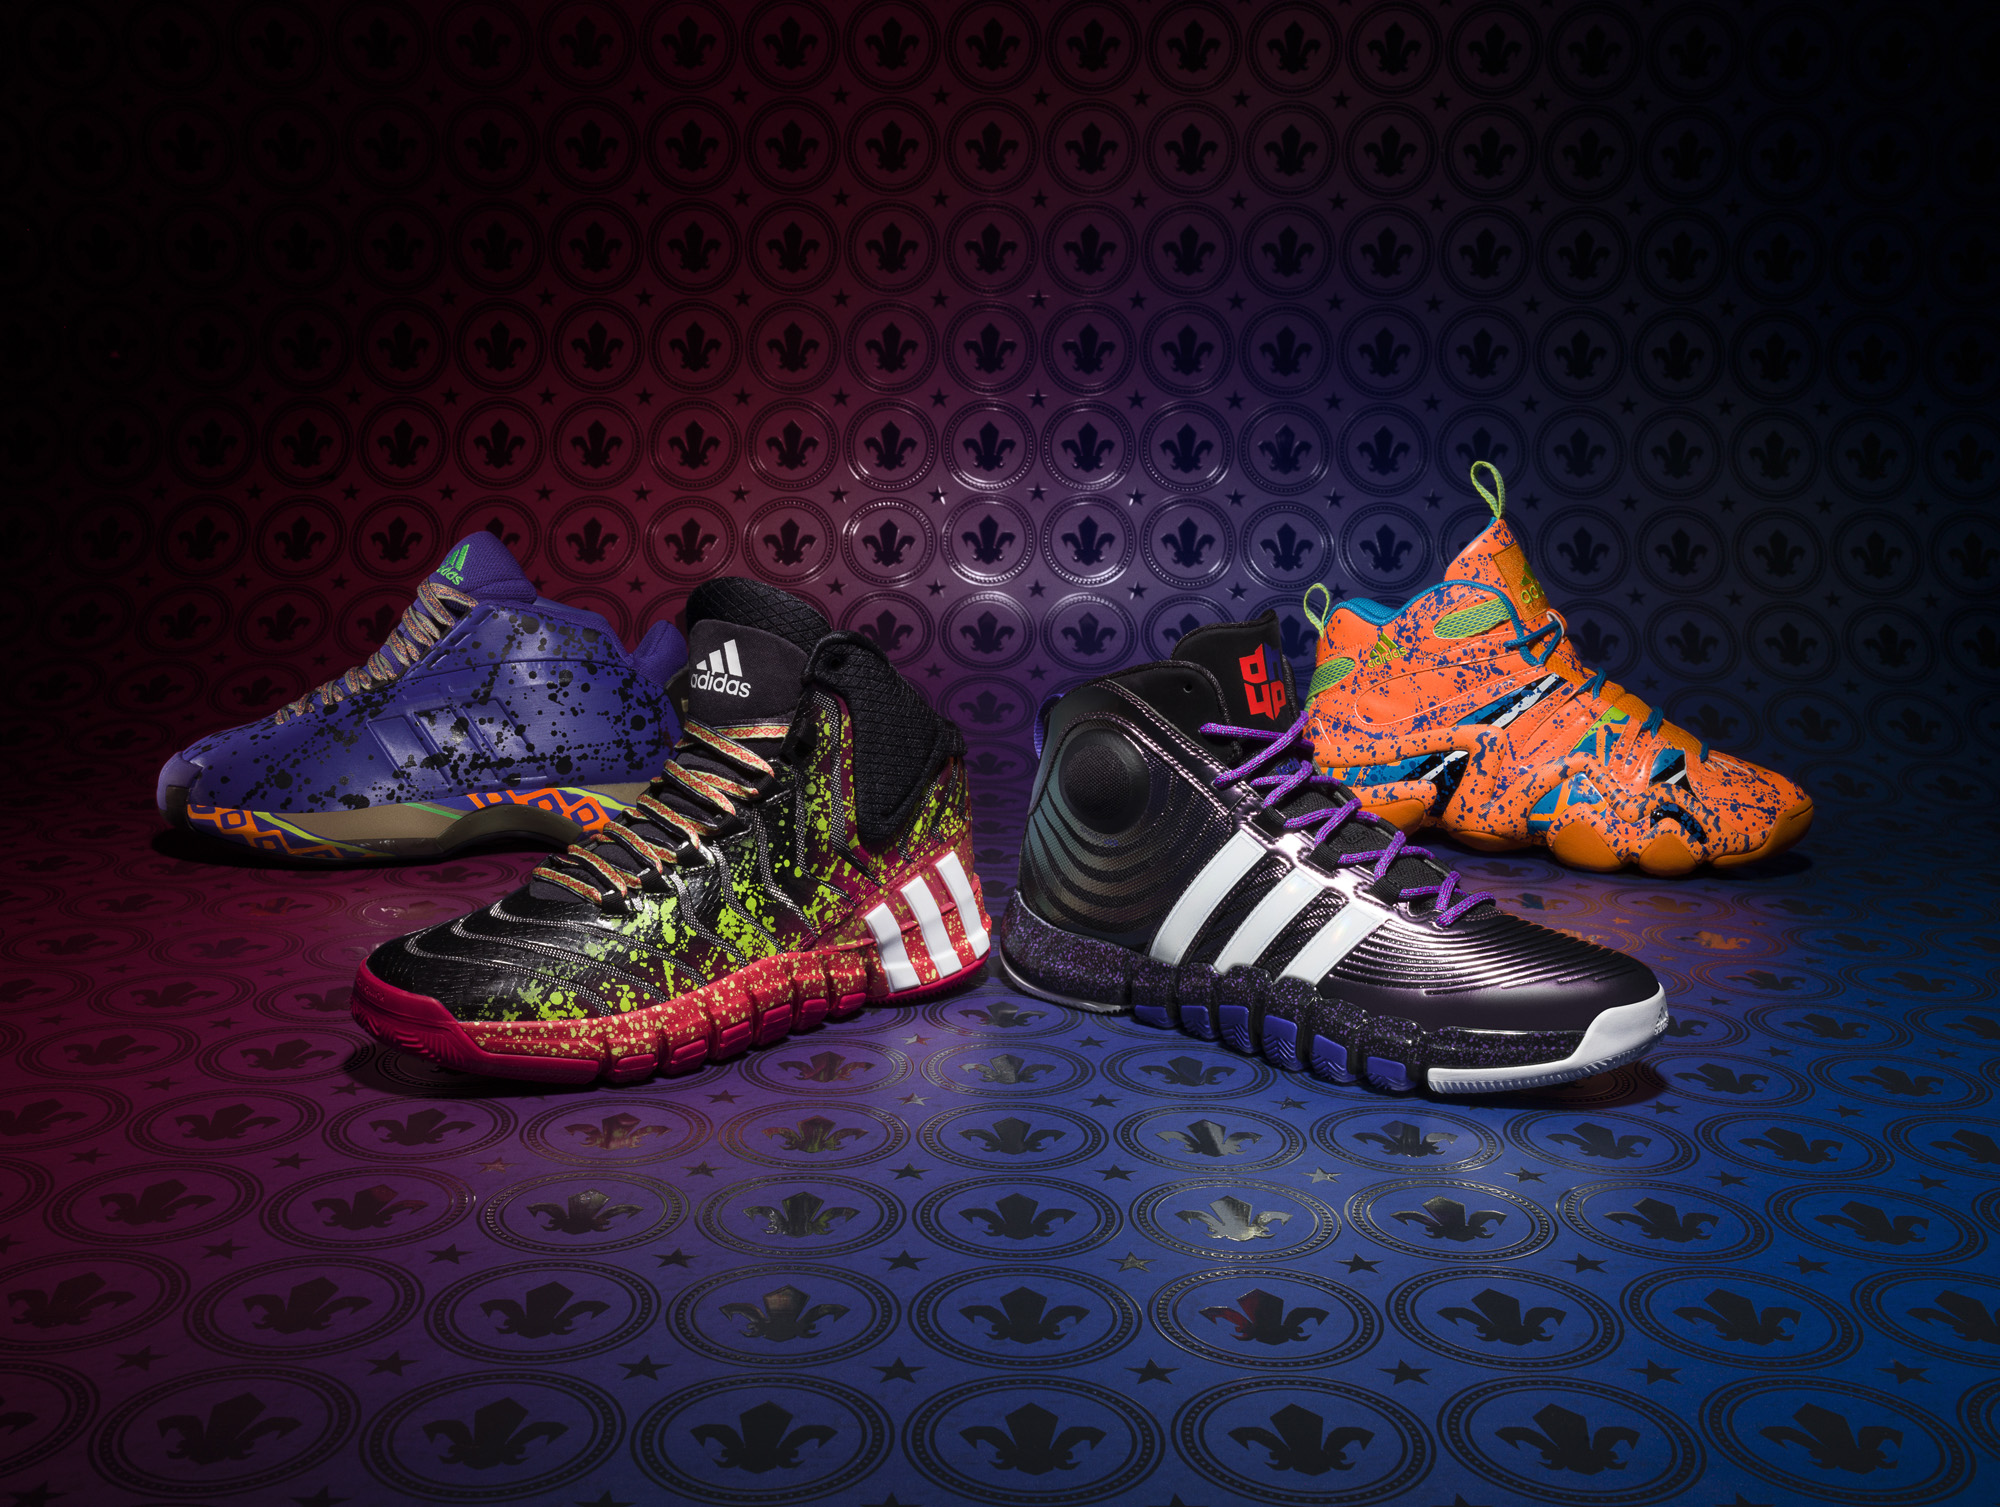 Adidas Basketball Debuts 2014 NBA All-Star Footwear Collection | The Source2000 x 1507